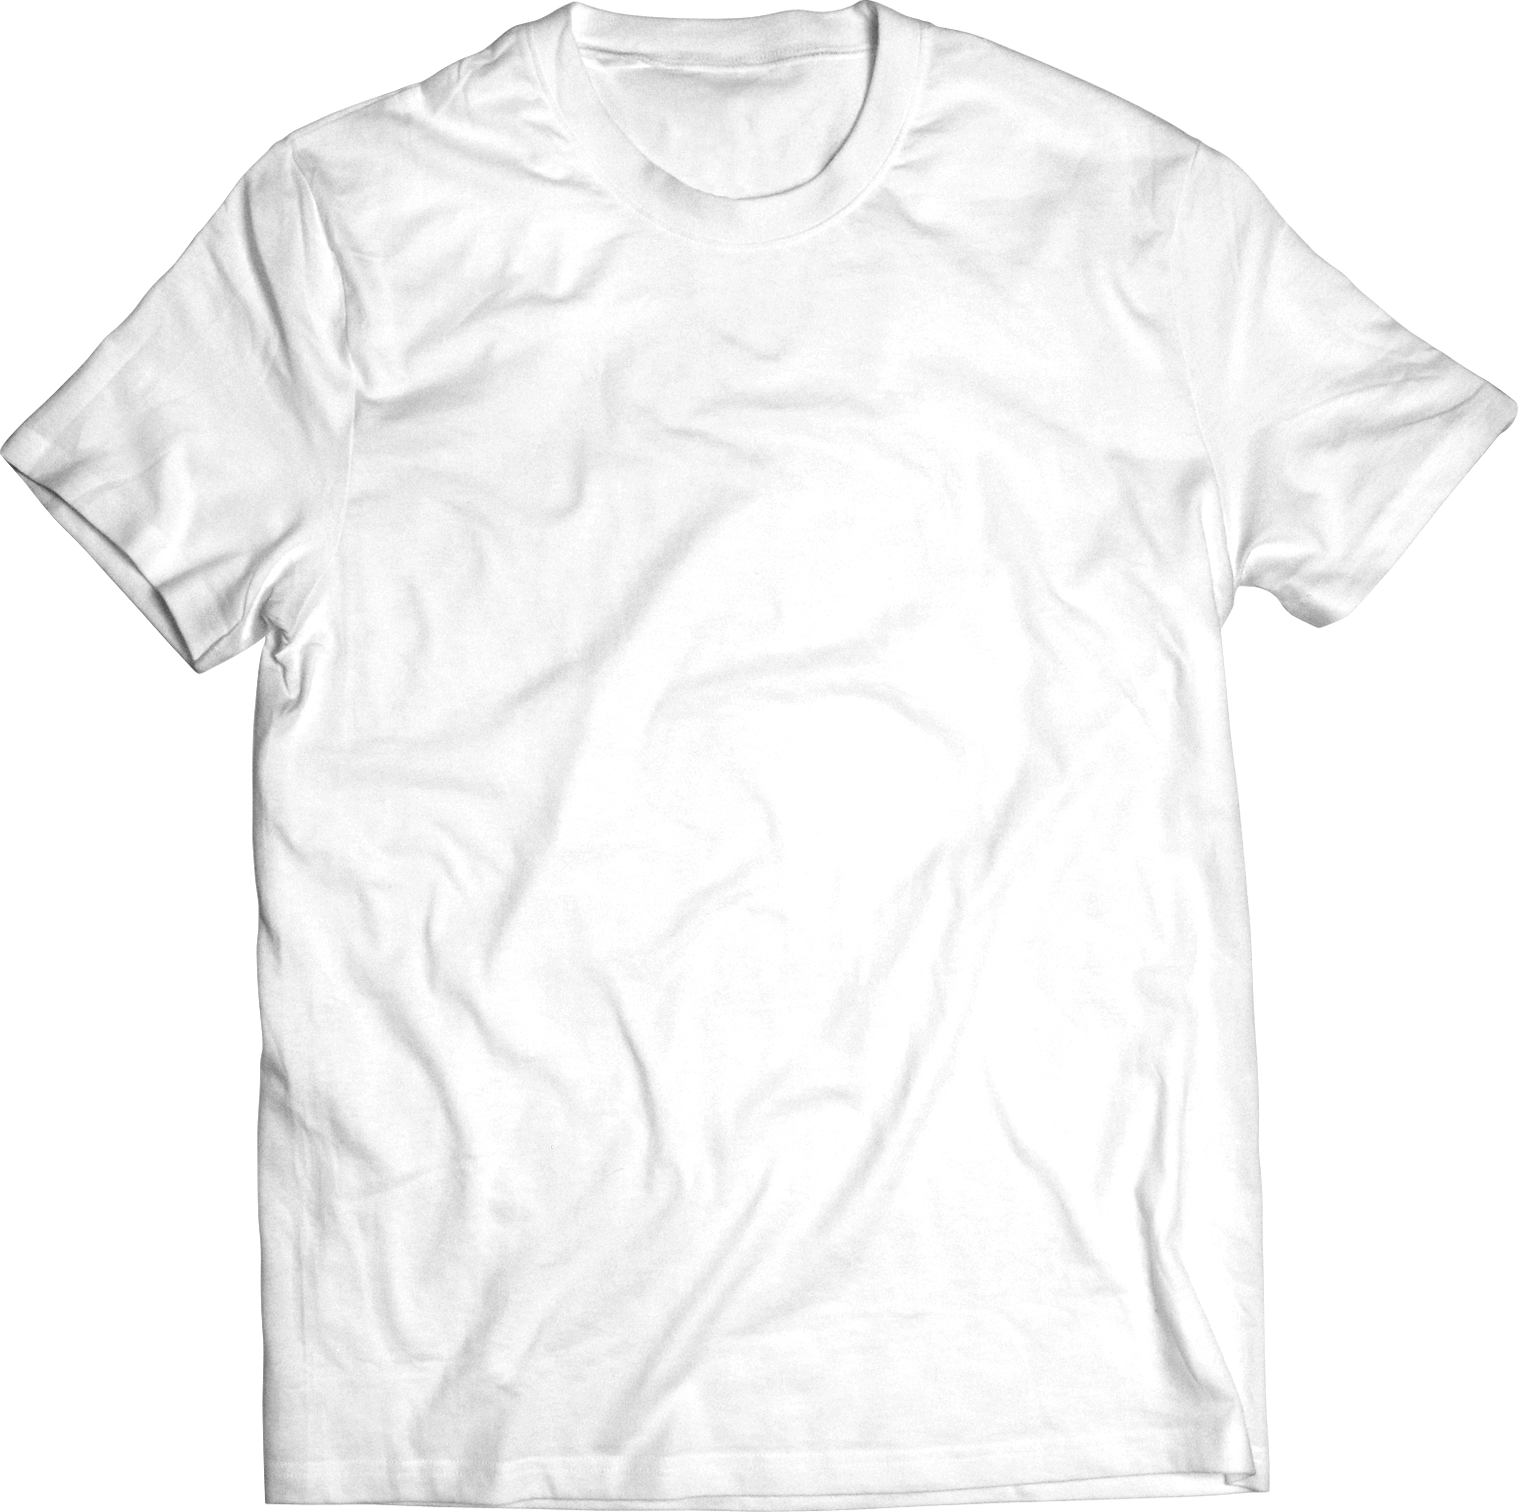 An image of a white t-shirt